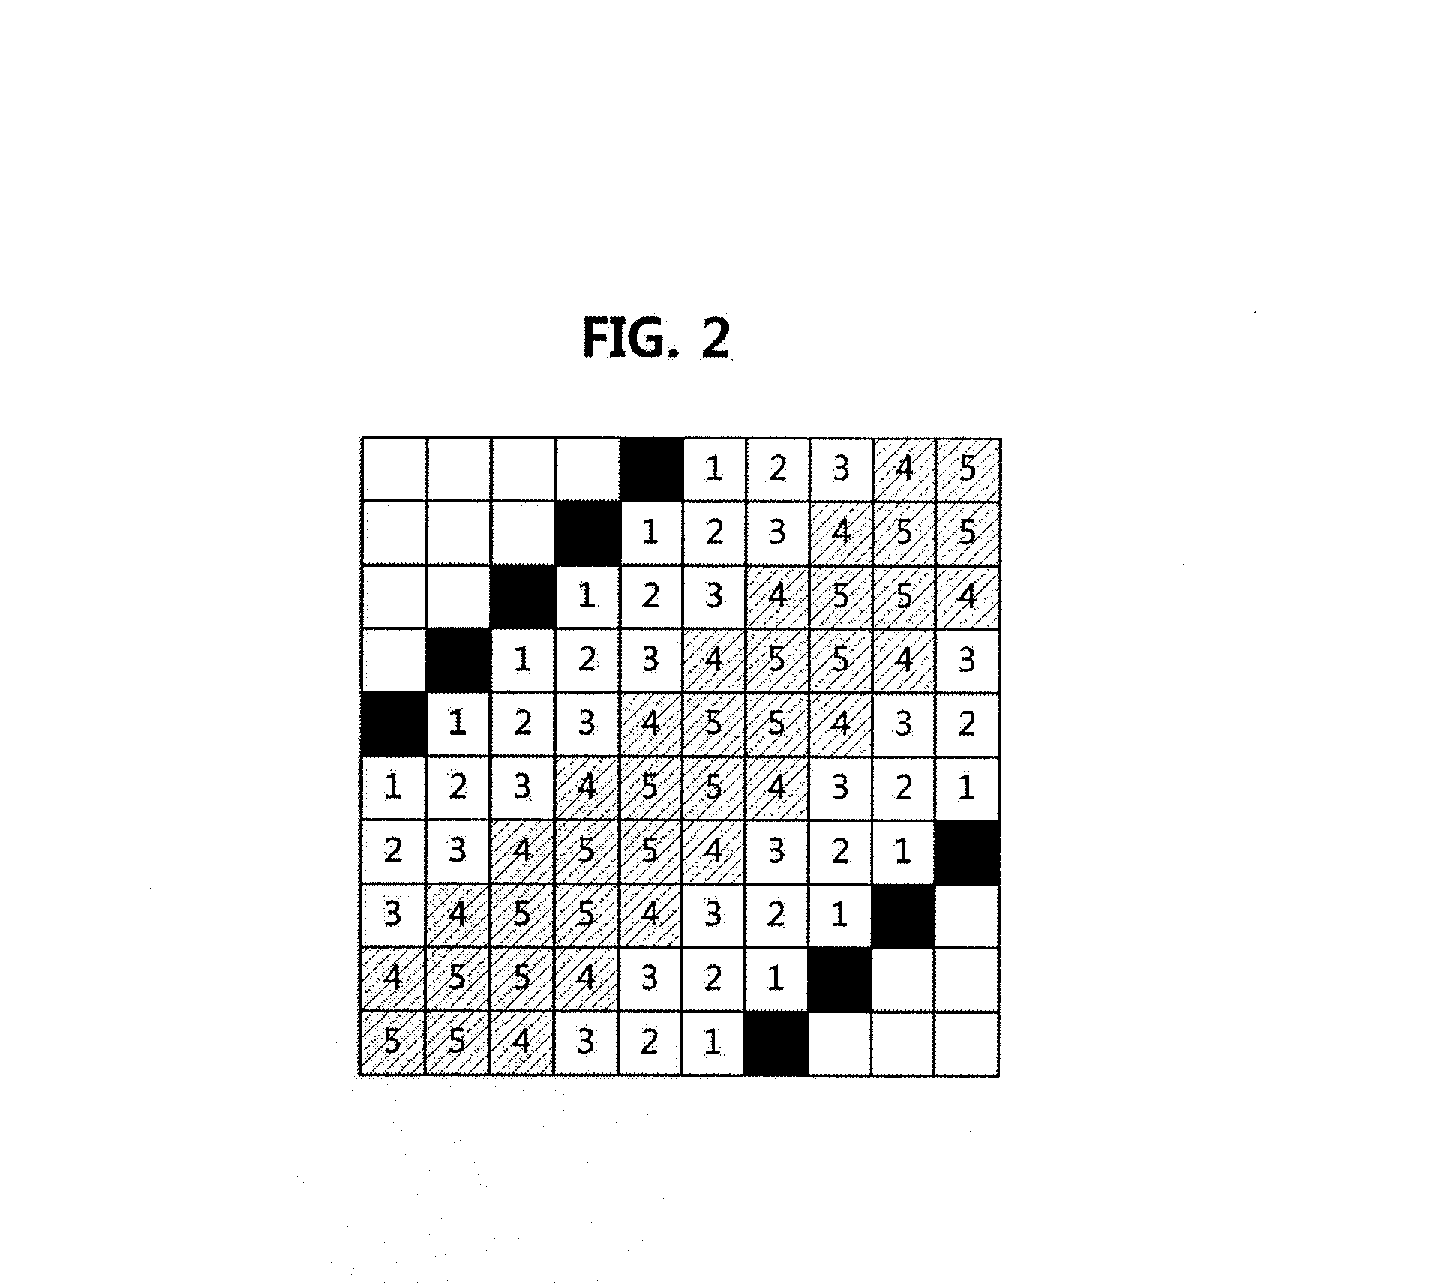 Method of extracting ridge data and apparatus and method for tracking joint motion of object